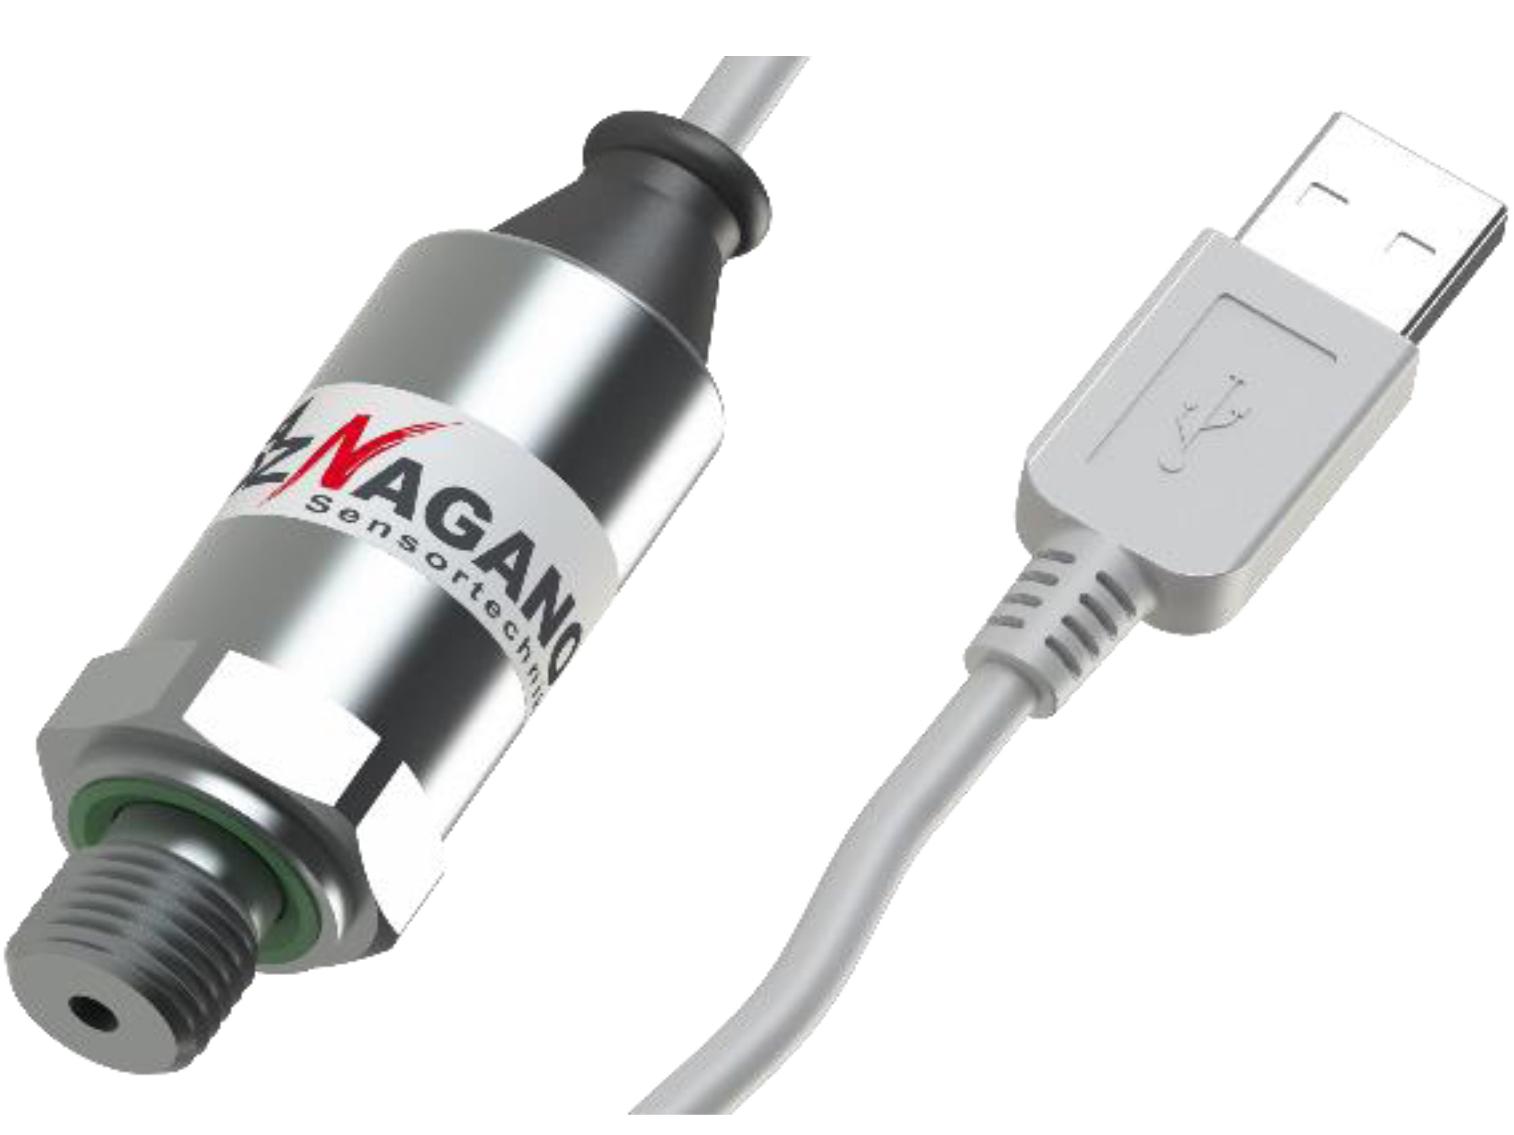 Pressure transmitters deliver all the right connections